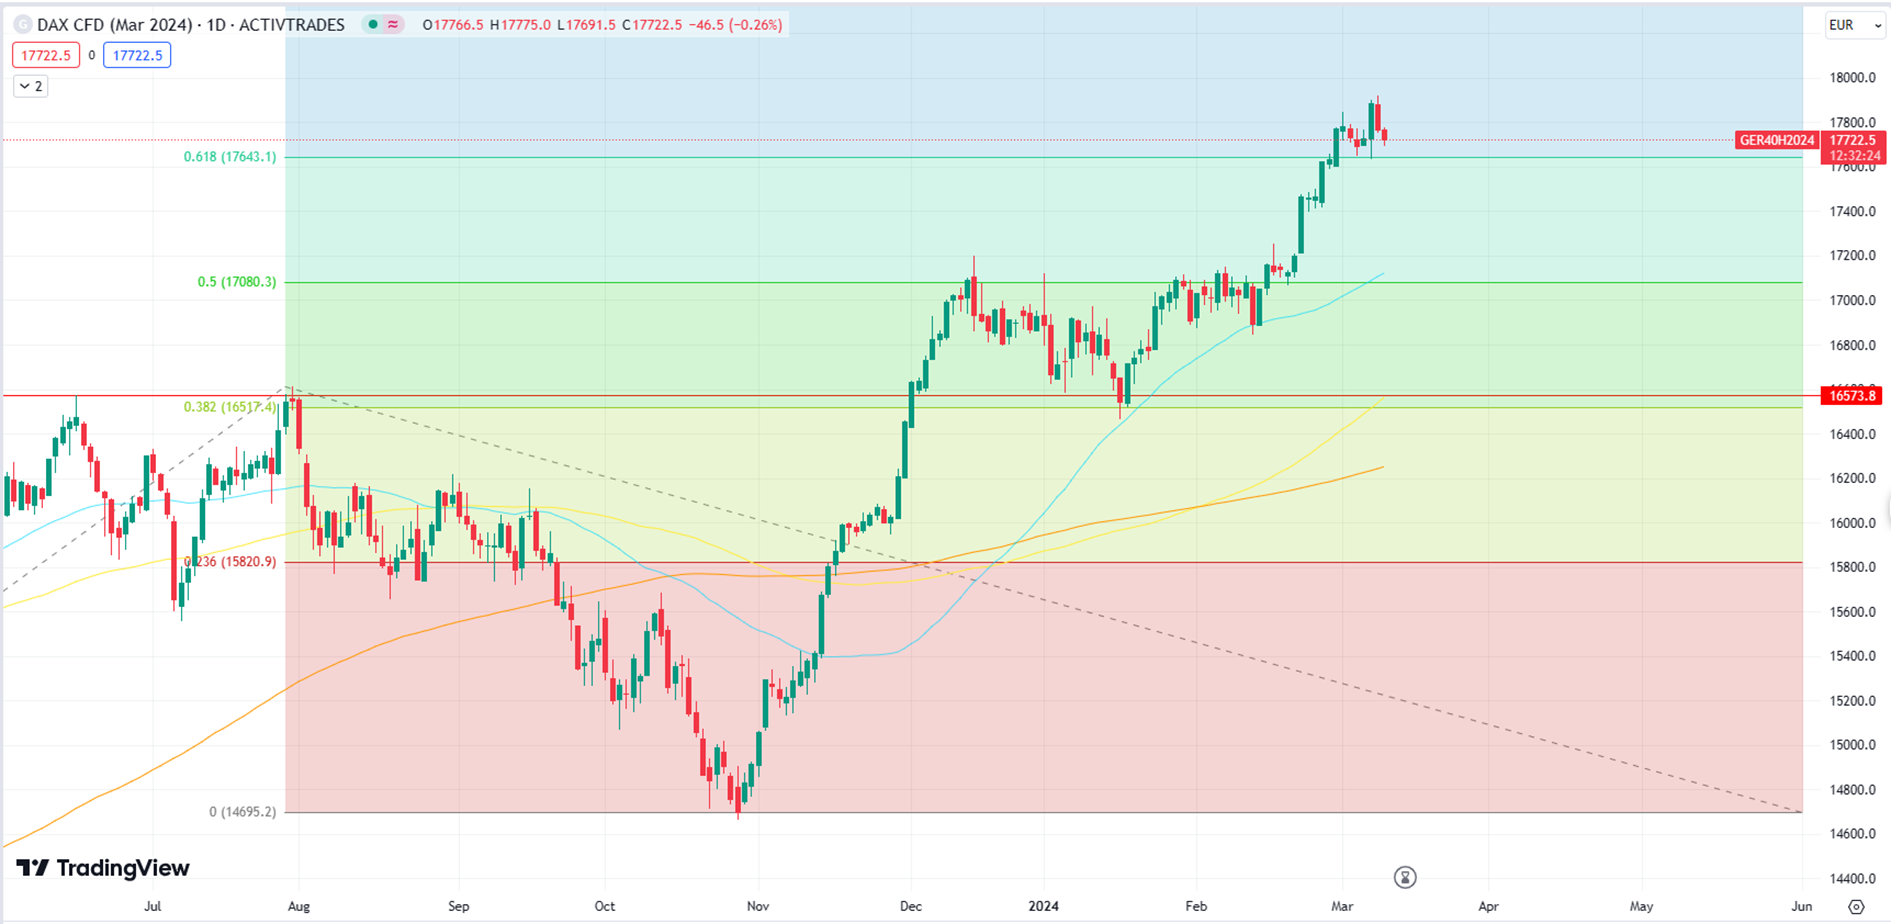 DAX Retreats from Recent Highs, Eyes 17,600 Support Level